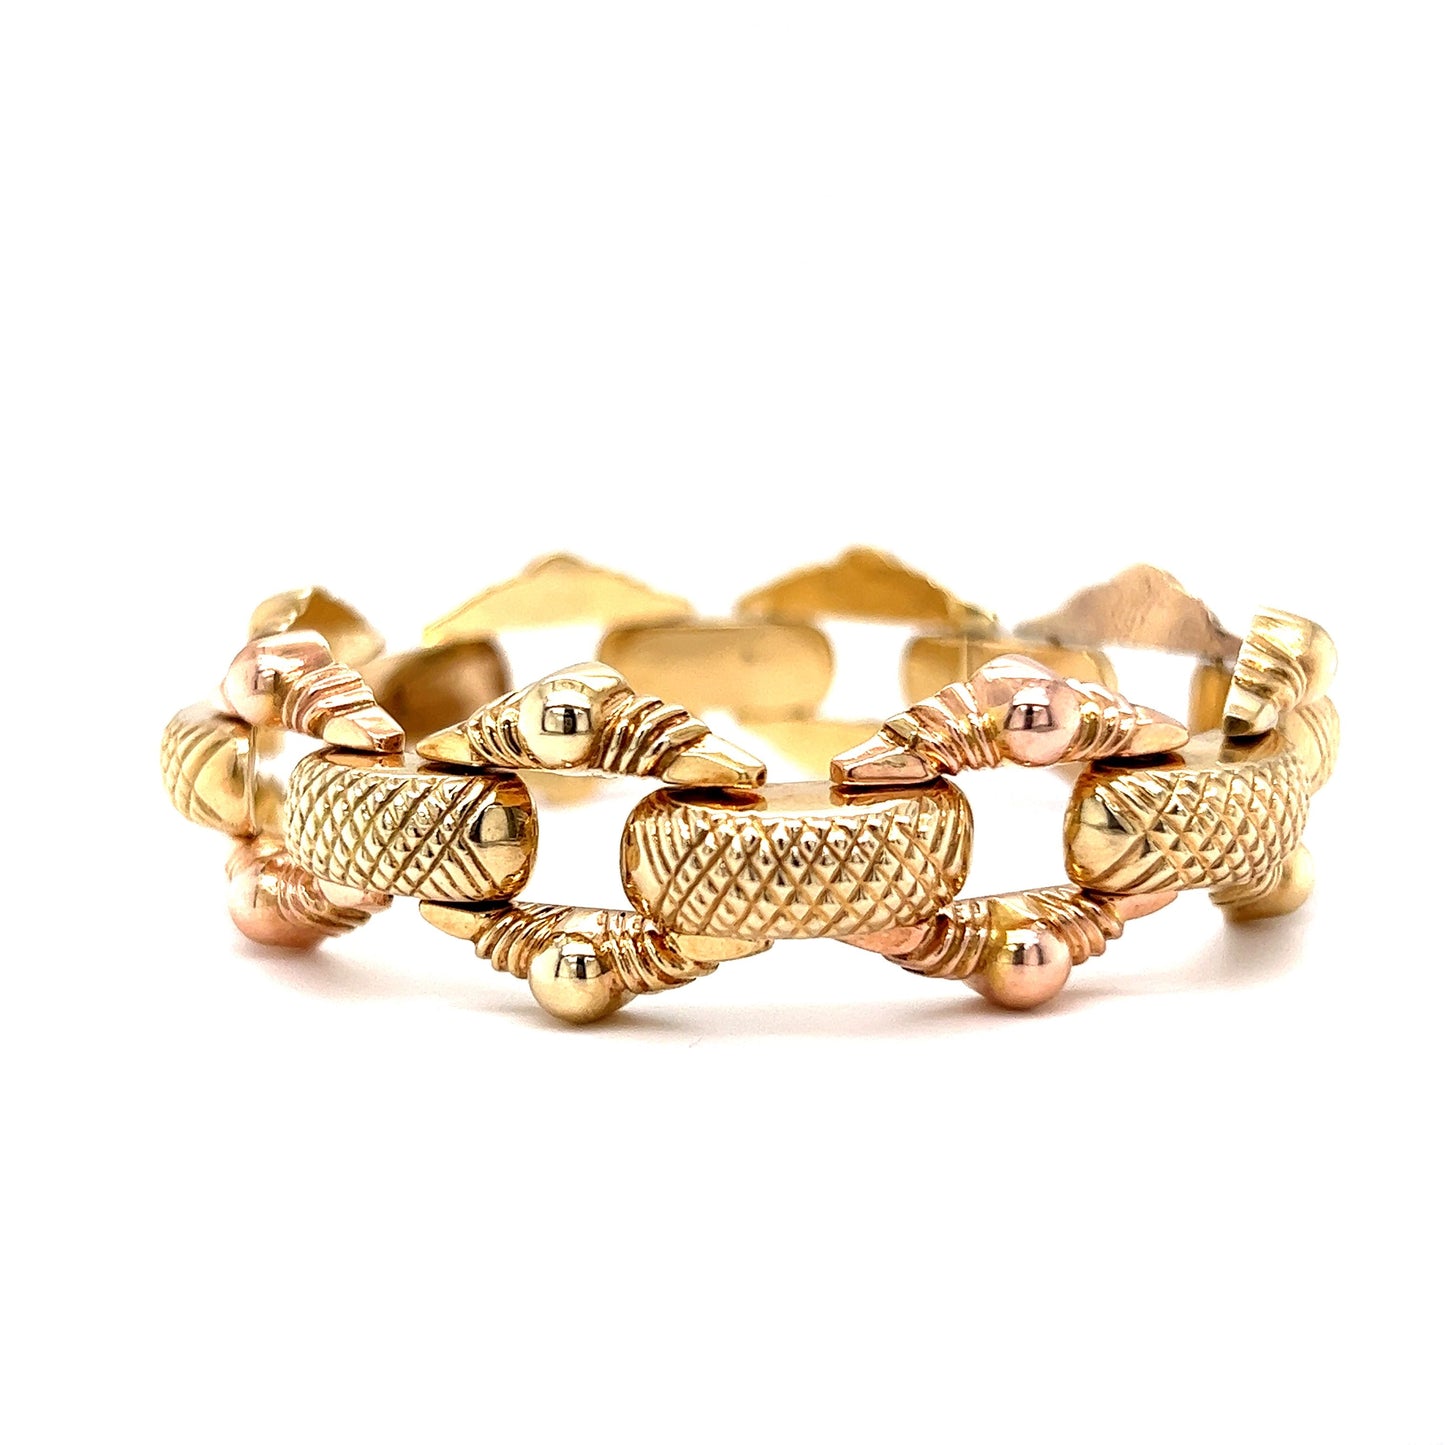 Vintage Bracelet Mid-Century in 14k Yellow and Rose Gold